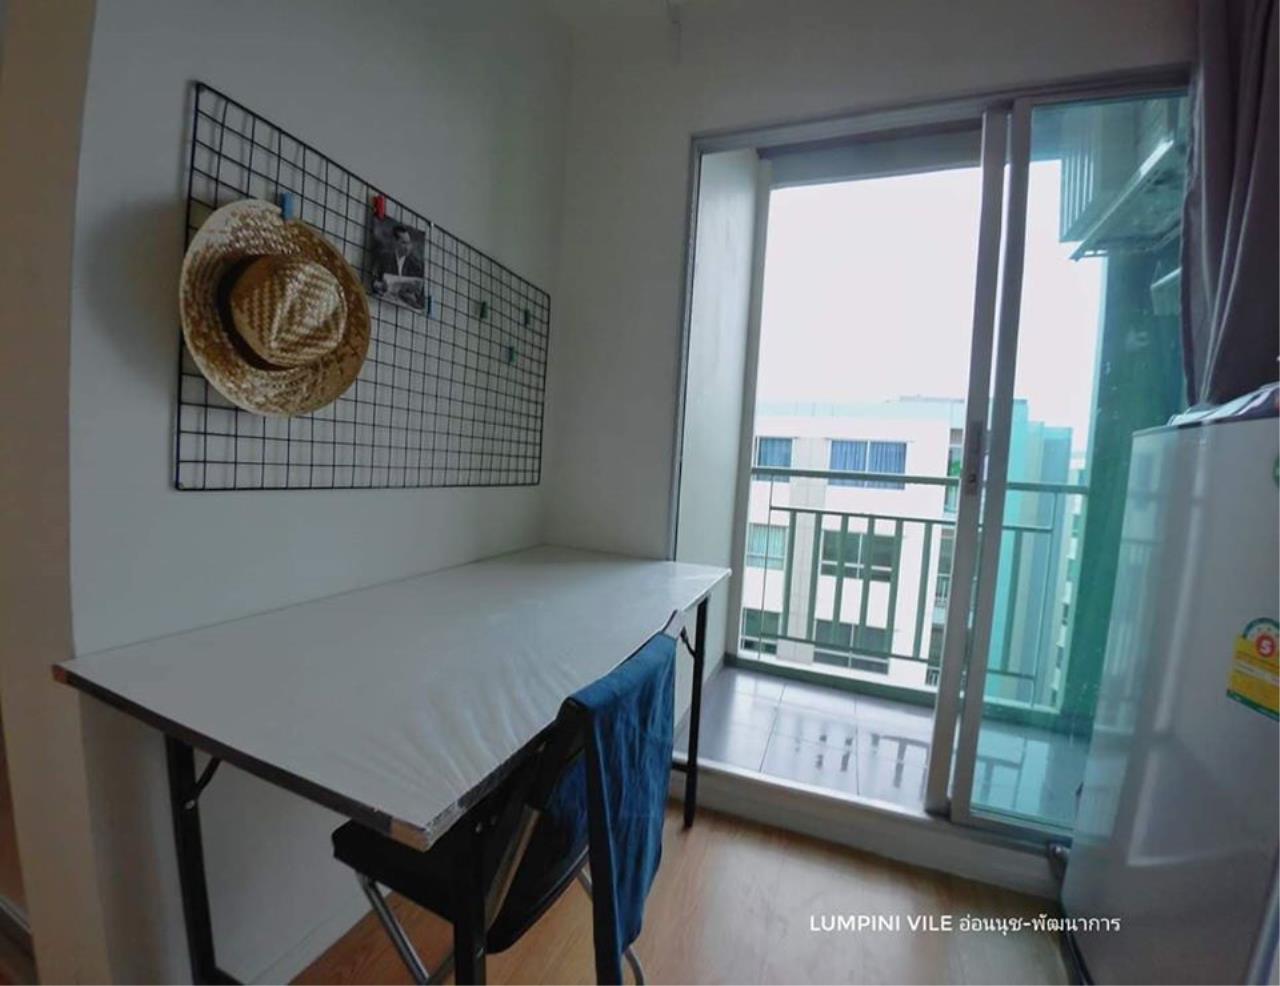 Agent Thawanrat Agency's Condo for rental LUMPINI VILLE ONNUT – PATTANAKARN Near Airport Link Hua Mak 1 bedroom,1 bathroom. size 23 sqm.Floor 8 th. fully furnished Ready to move in 5